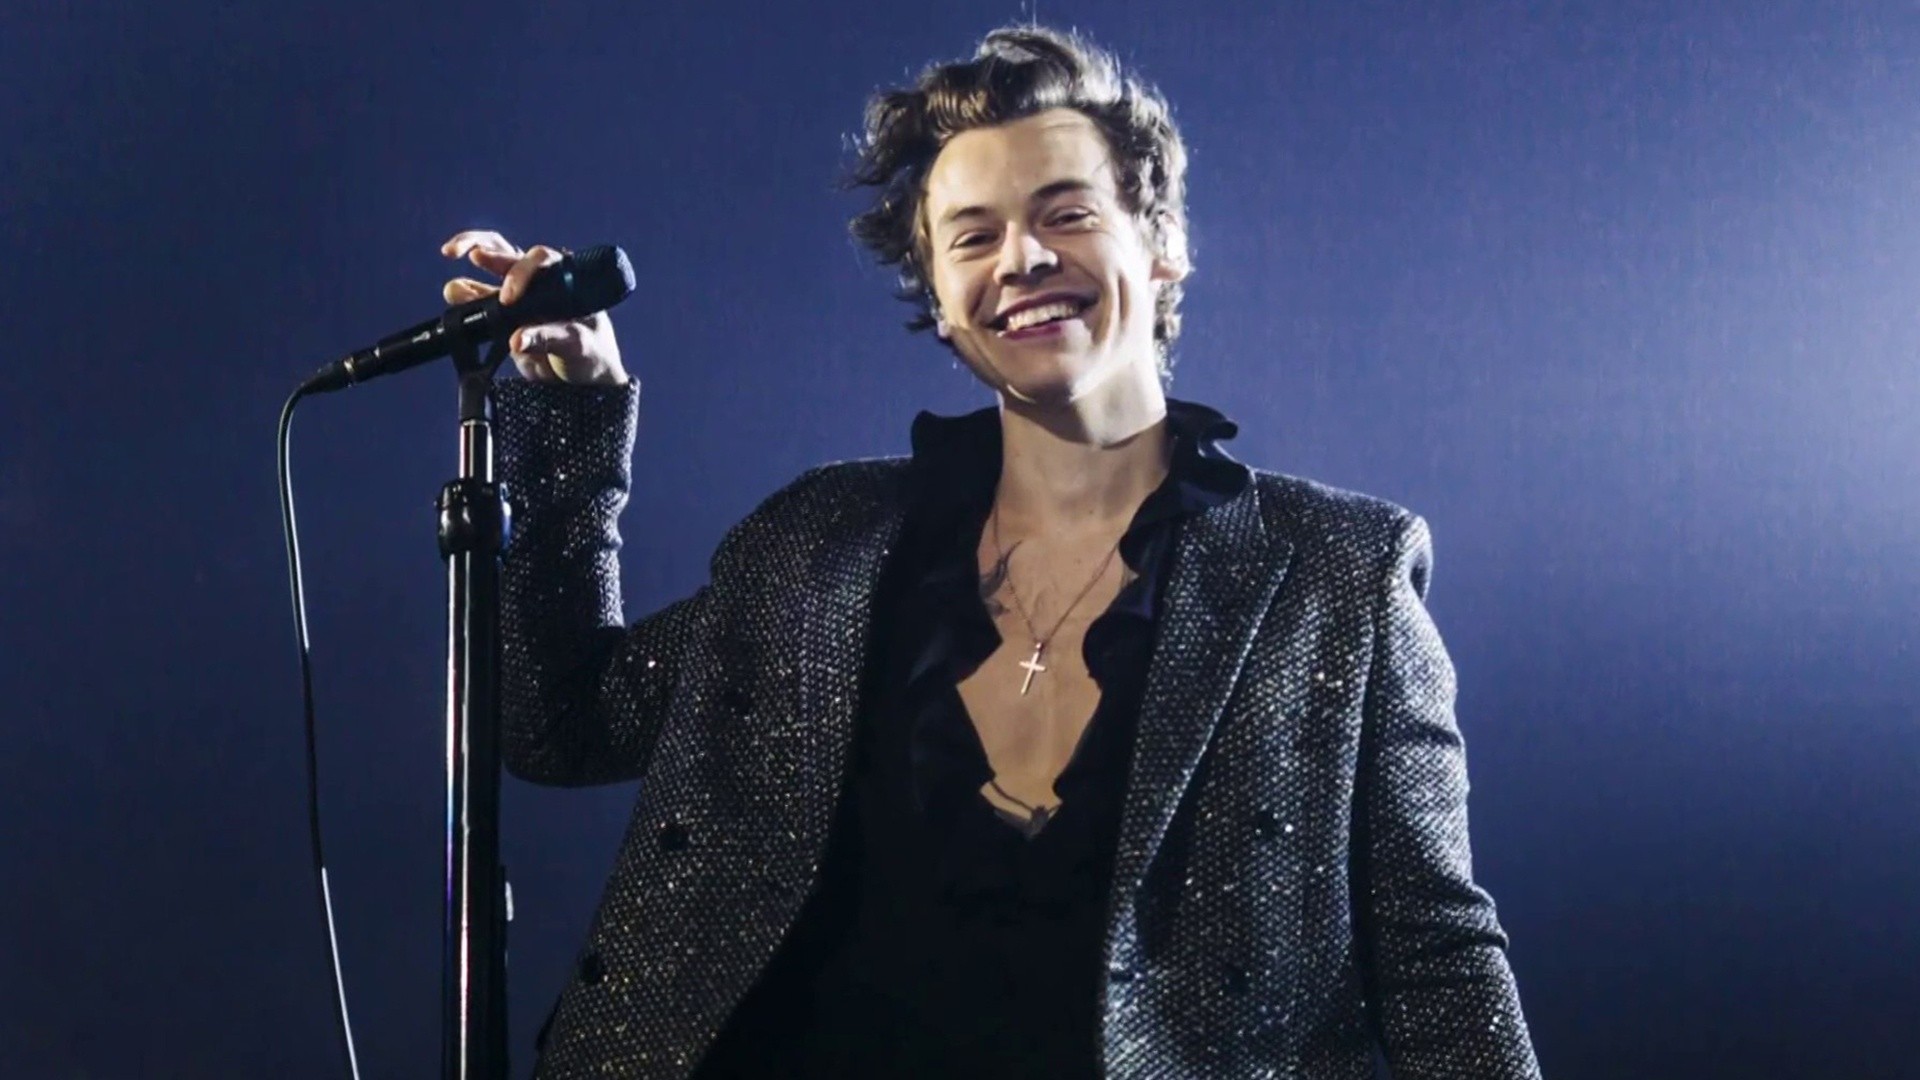 Wanted: Tour guides of Harry Styles' hometown